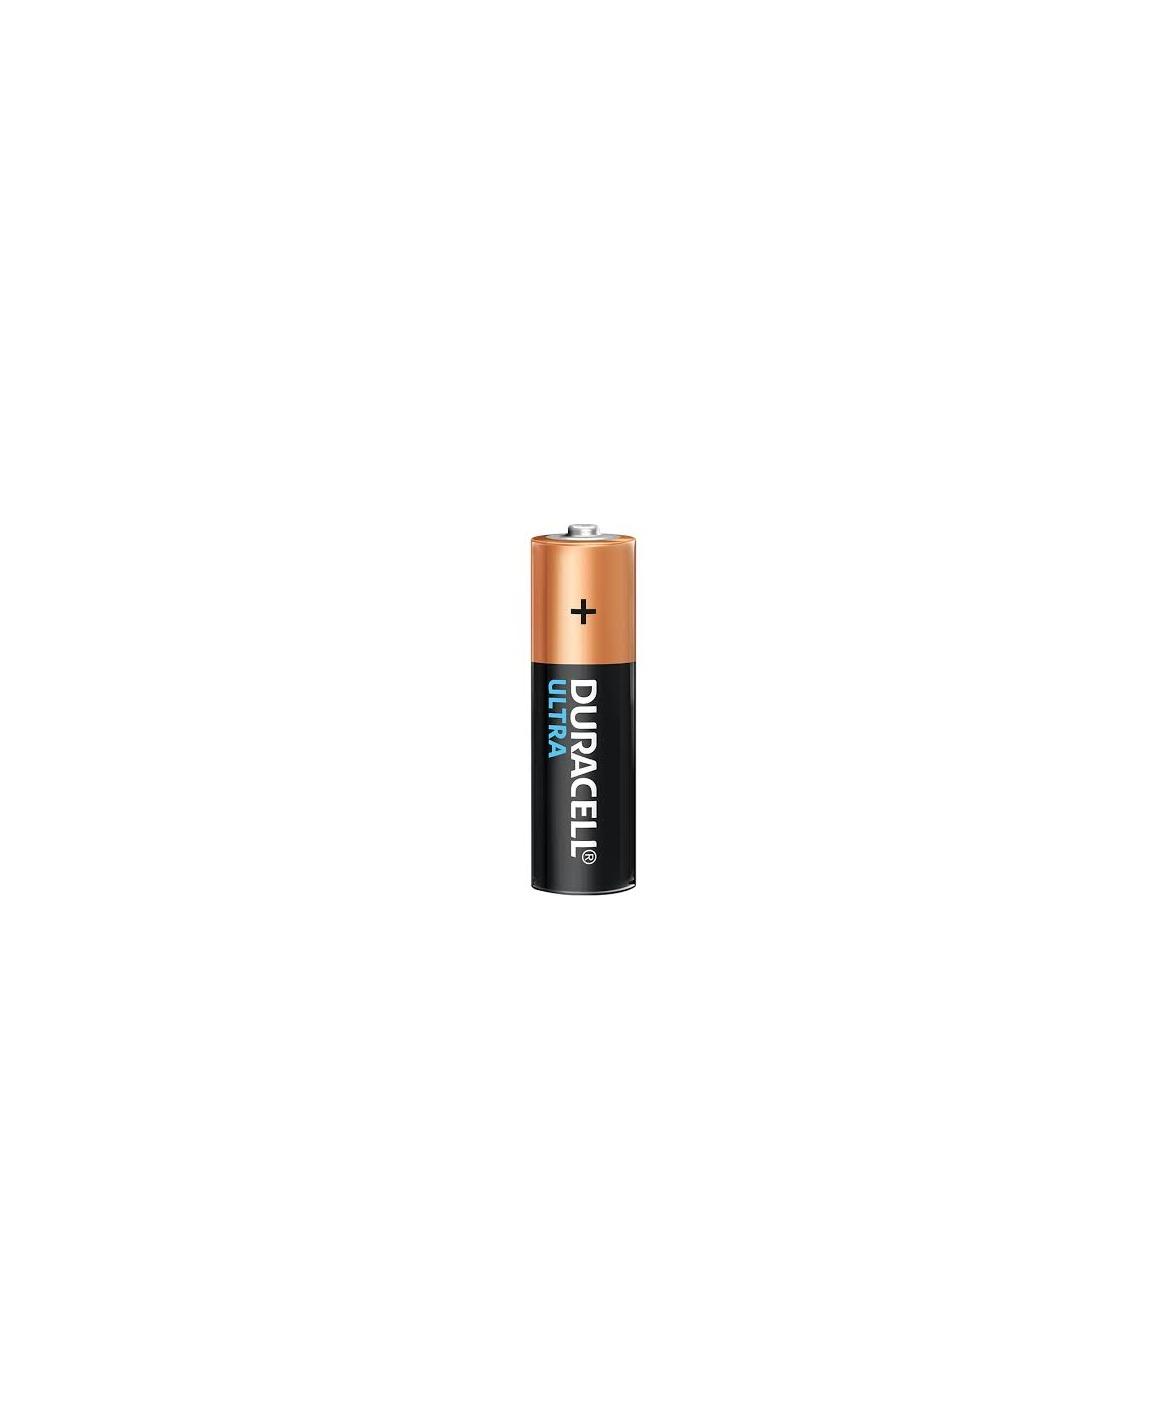 Buy Duracell AAA 1.5 V Cylindrical Alkaline Batteries online at best rates  in India